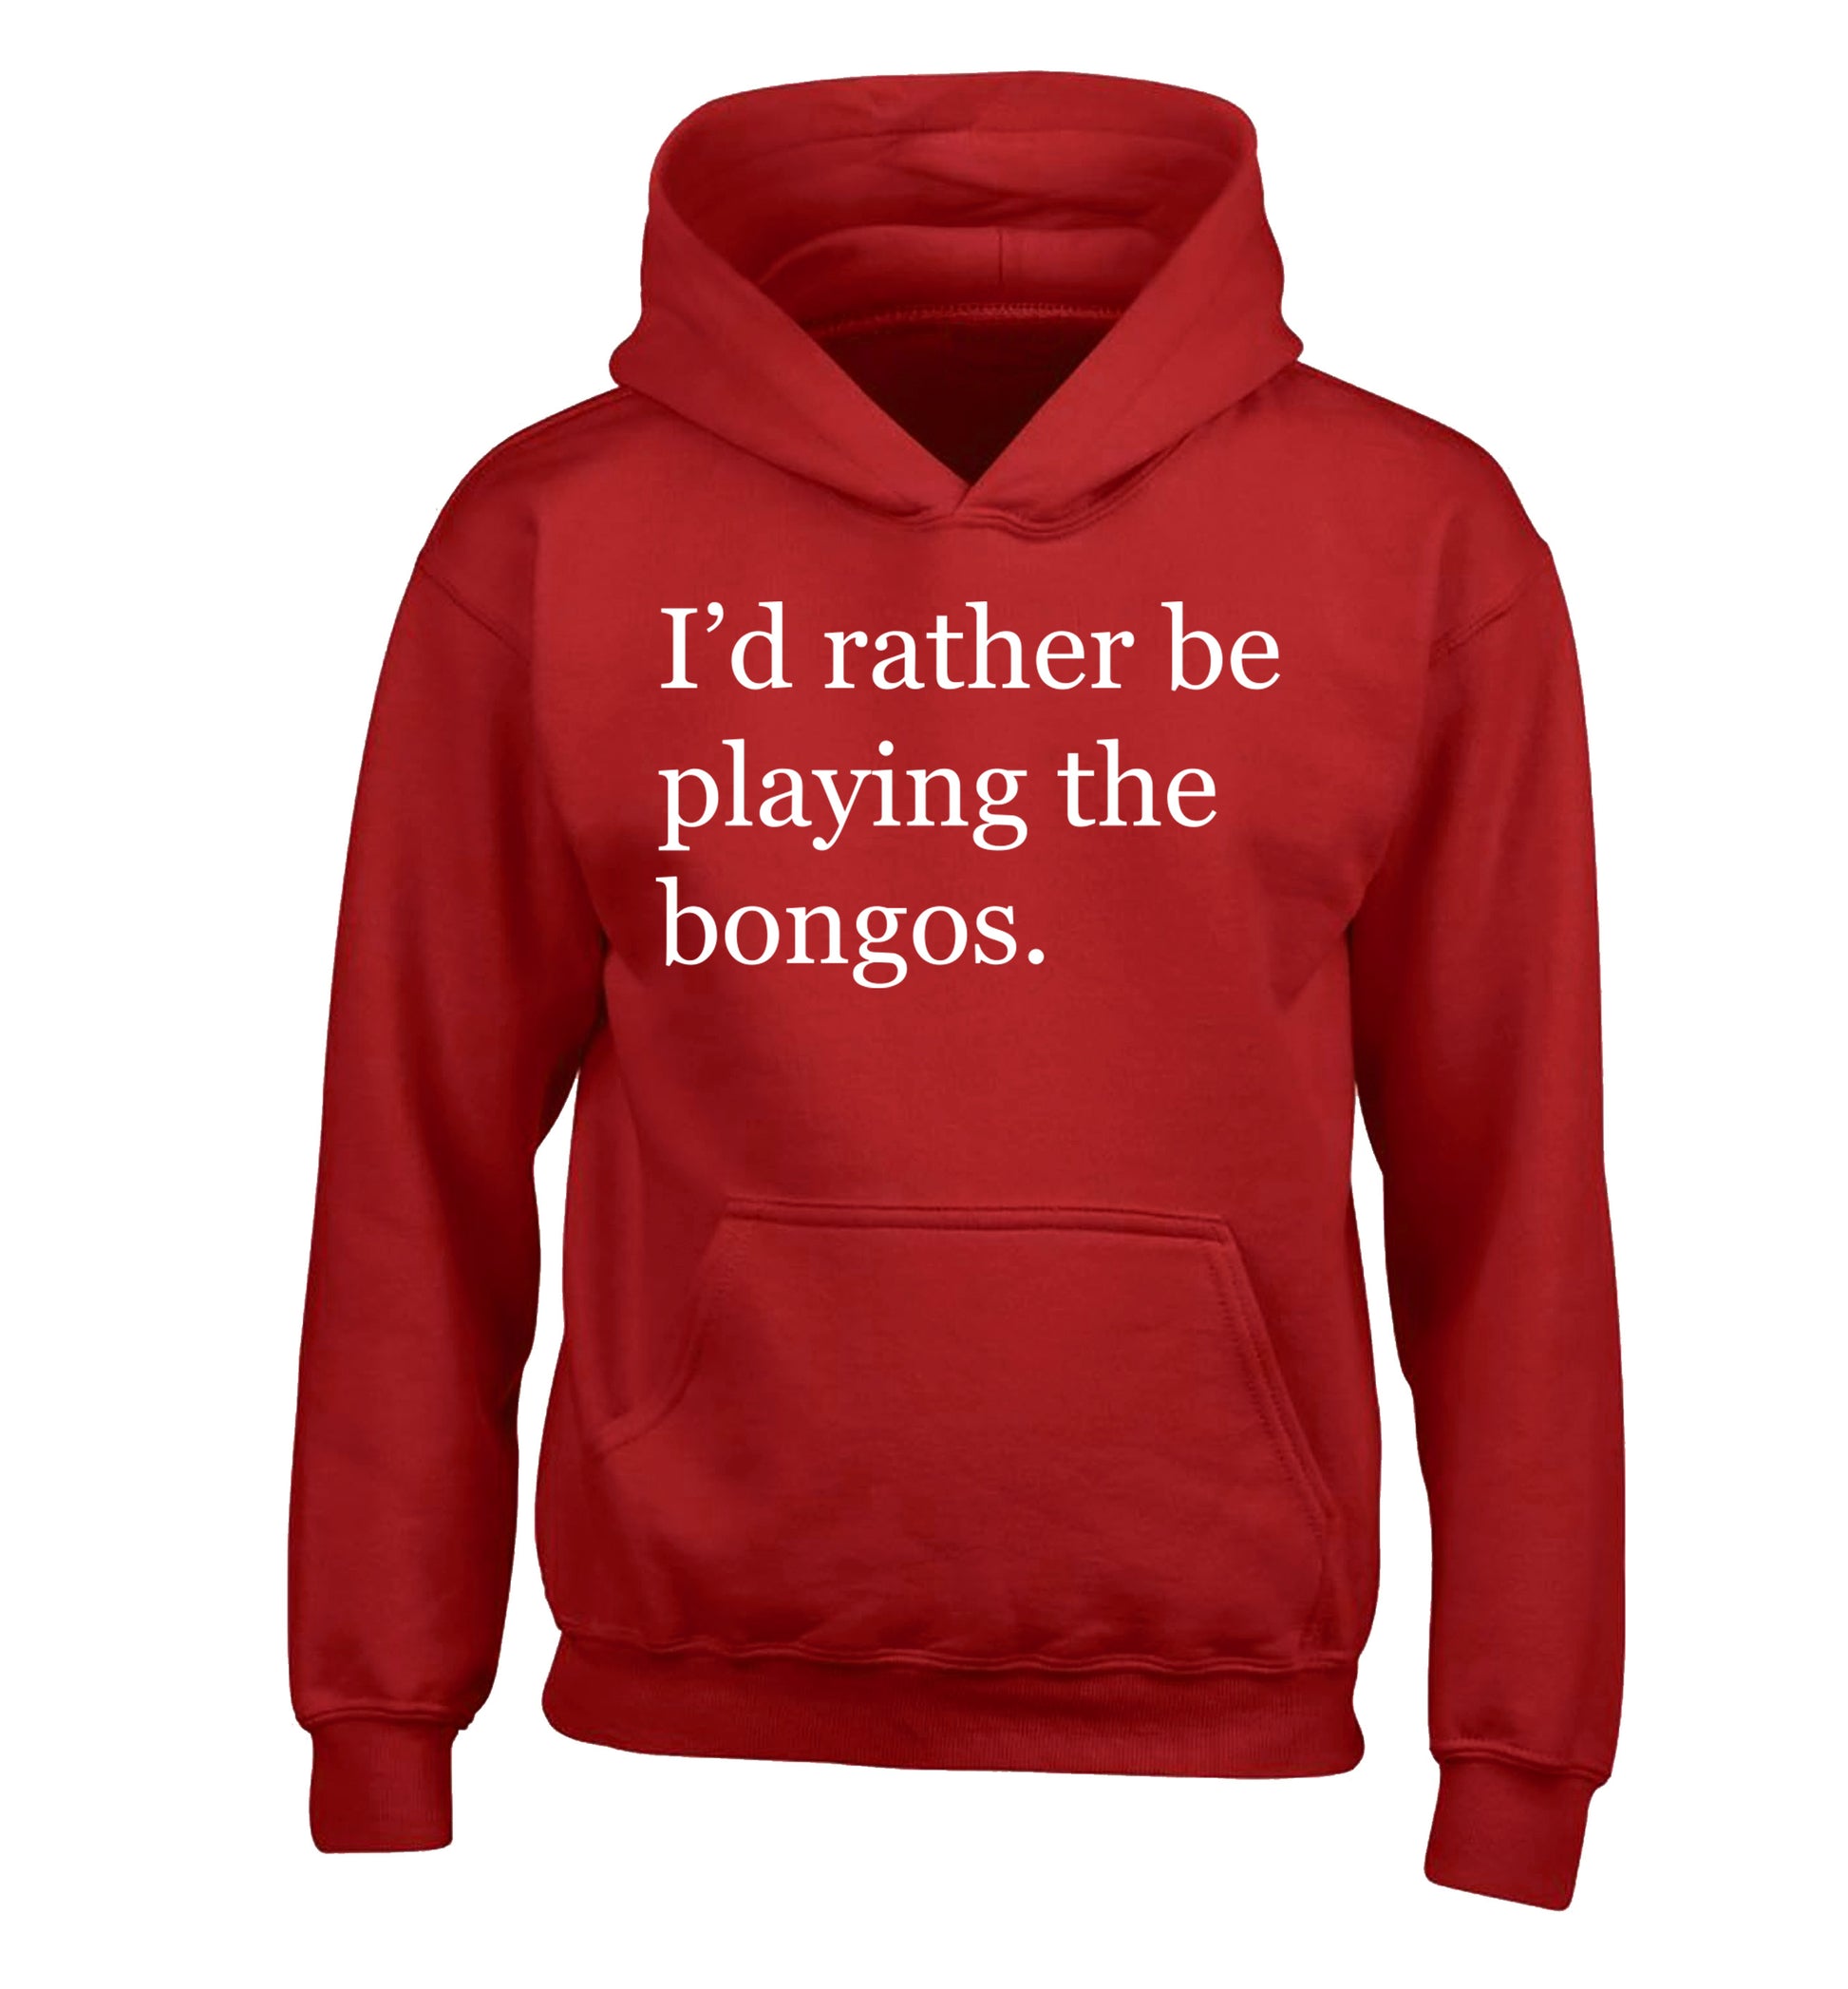 I'd rather be playing the bongos children's red hoodie 12-14 Years